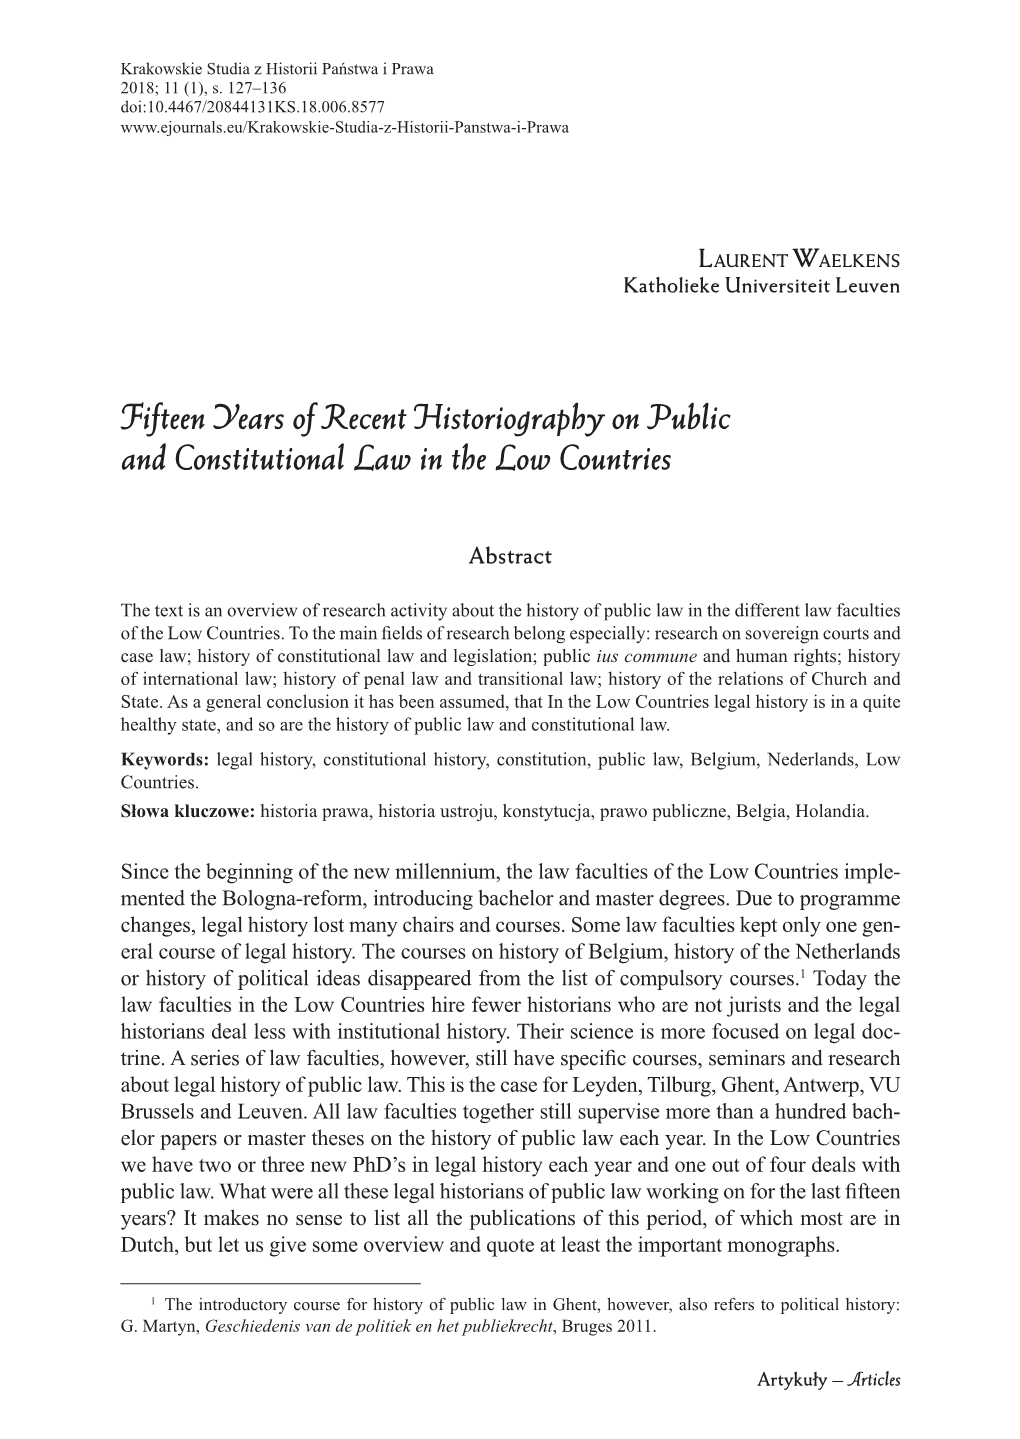 Fifteen Years of Recent Historiography on Public and Constitutional Law in the Low Countries